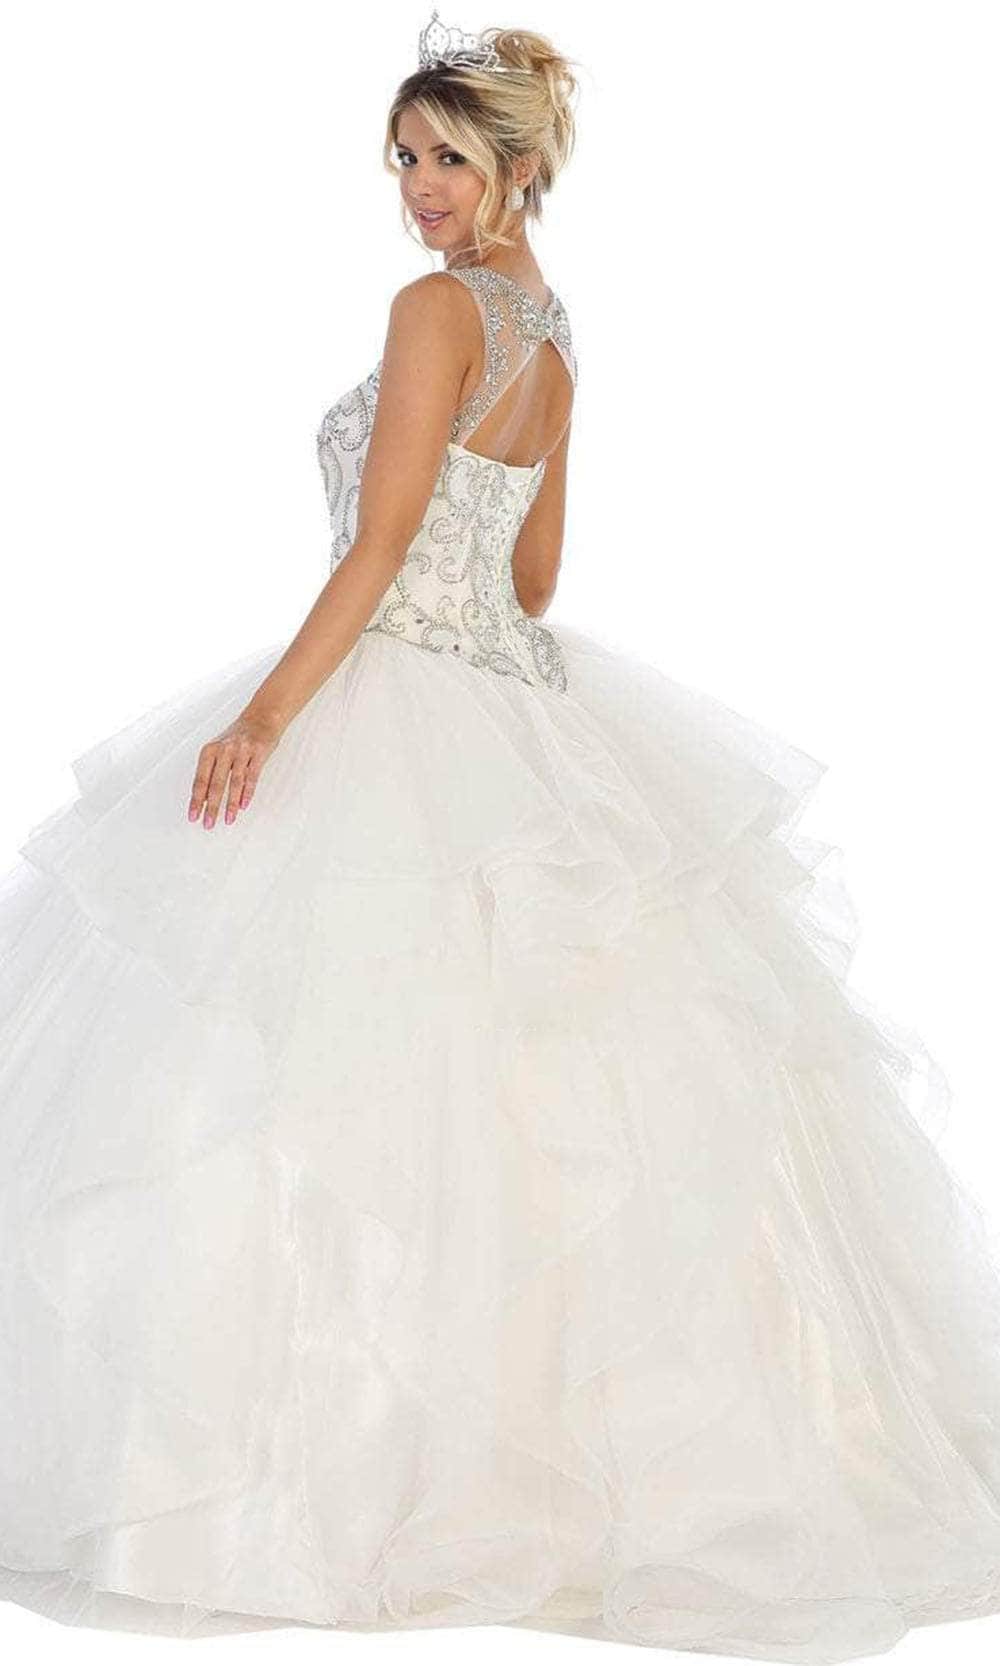 May Queen LK105 - Beaded Illusion Scoop Prom Ballgown Prom Ballgown